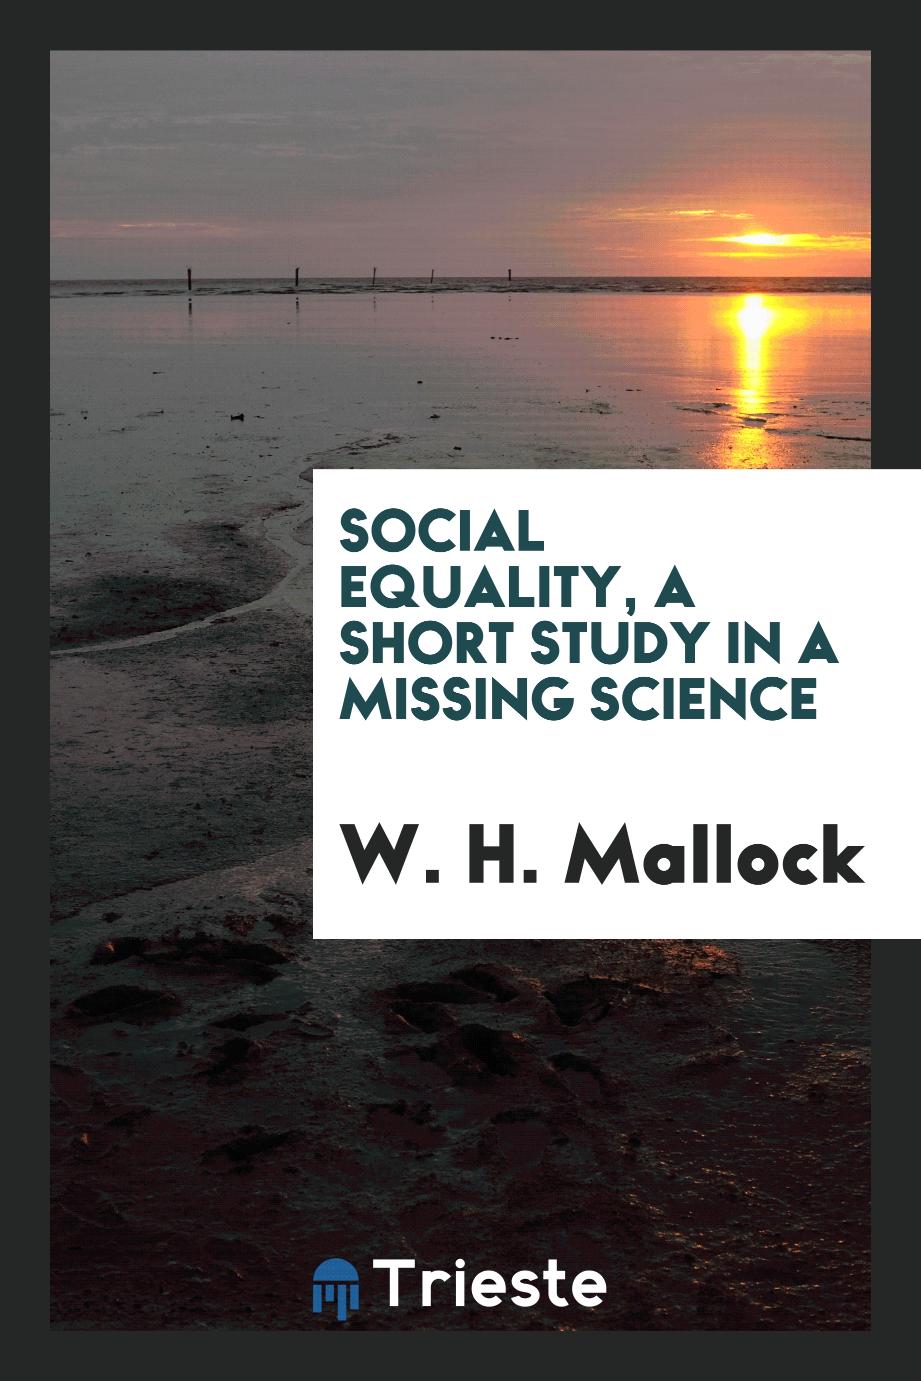 Social equality, a short study in a missing science